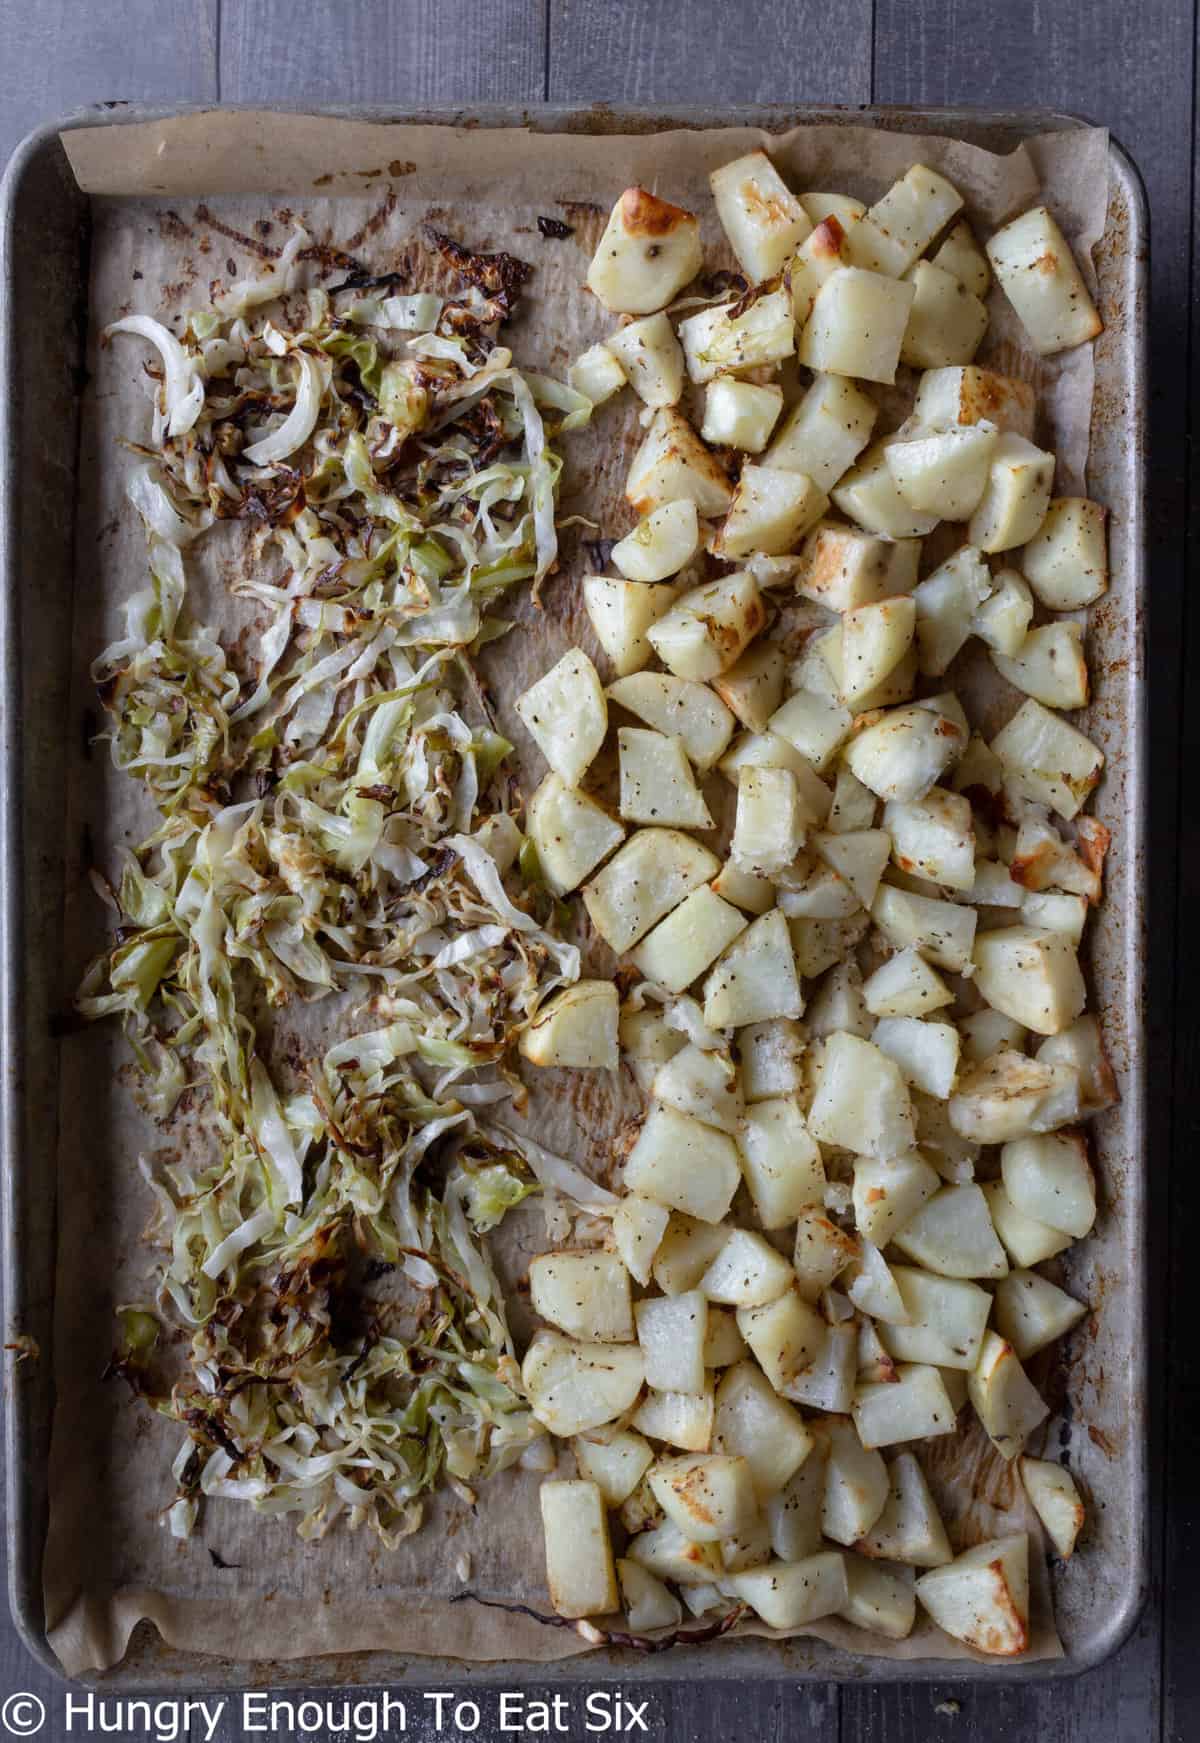 Roasted potatoes and cabbage on sheet pan.